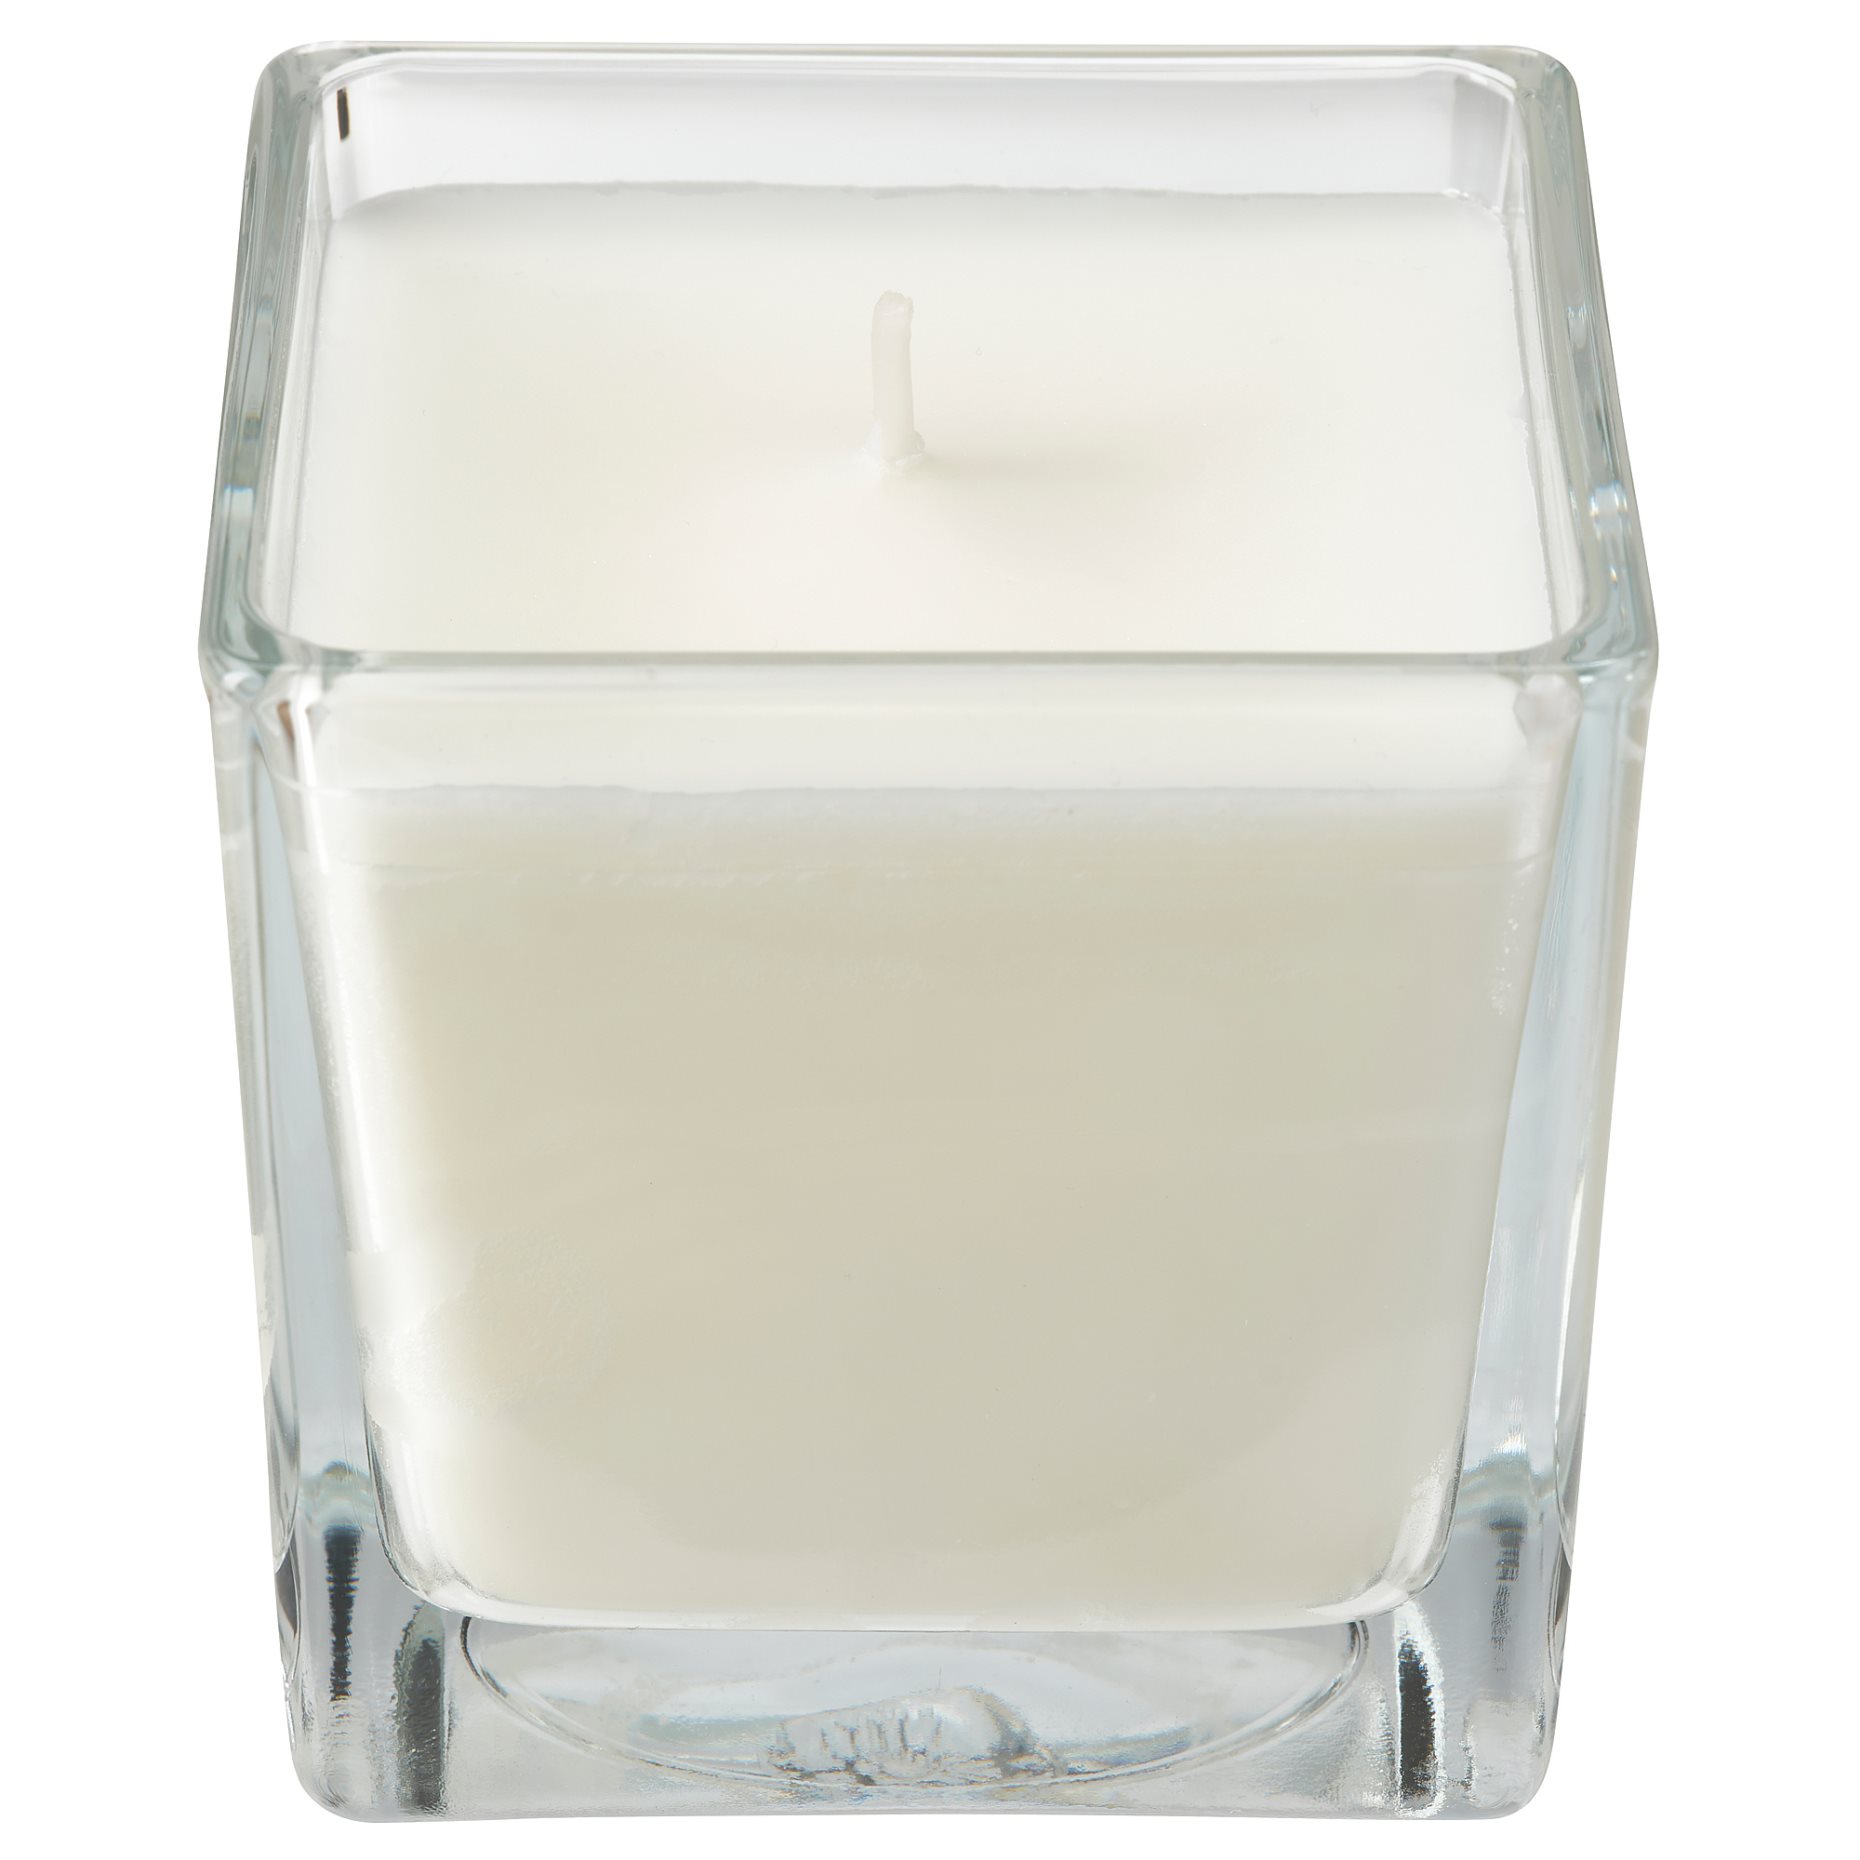 FRAMFÄRD, scented candle in glass/Fresh laundry, 8 cm, 704.967.85